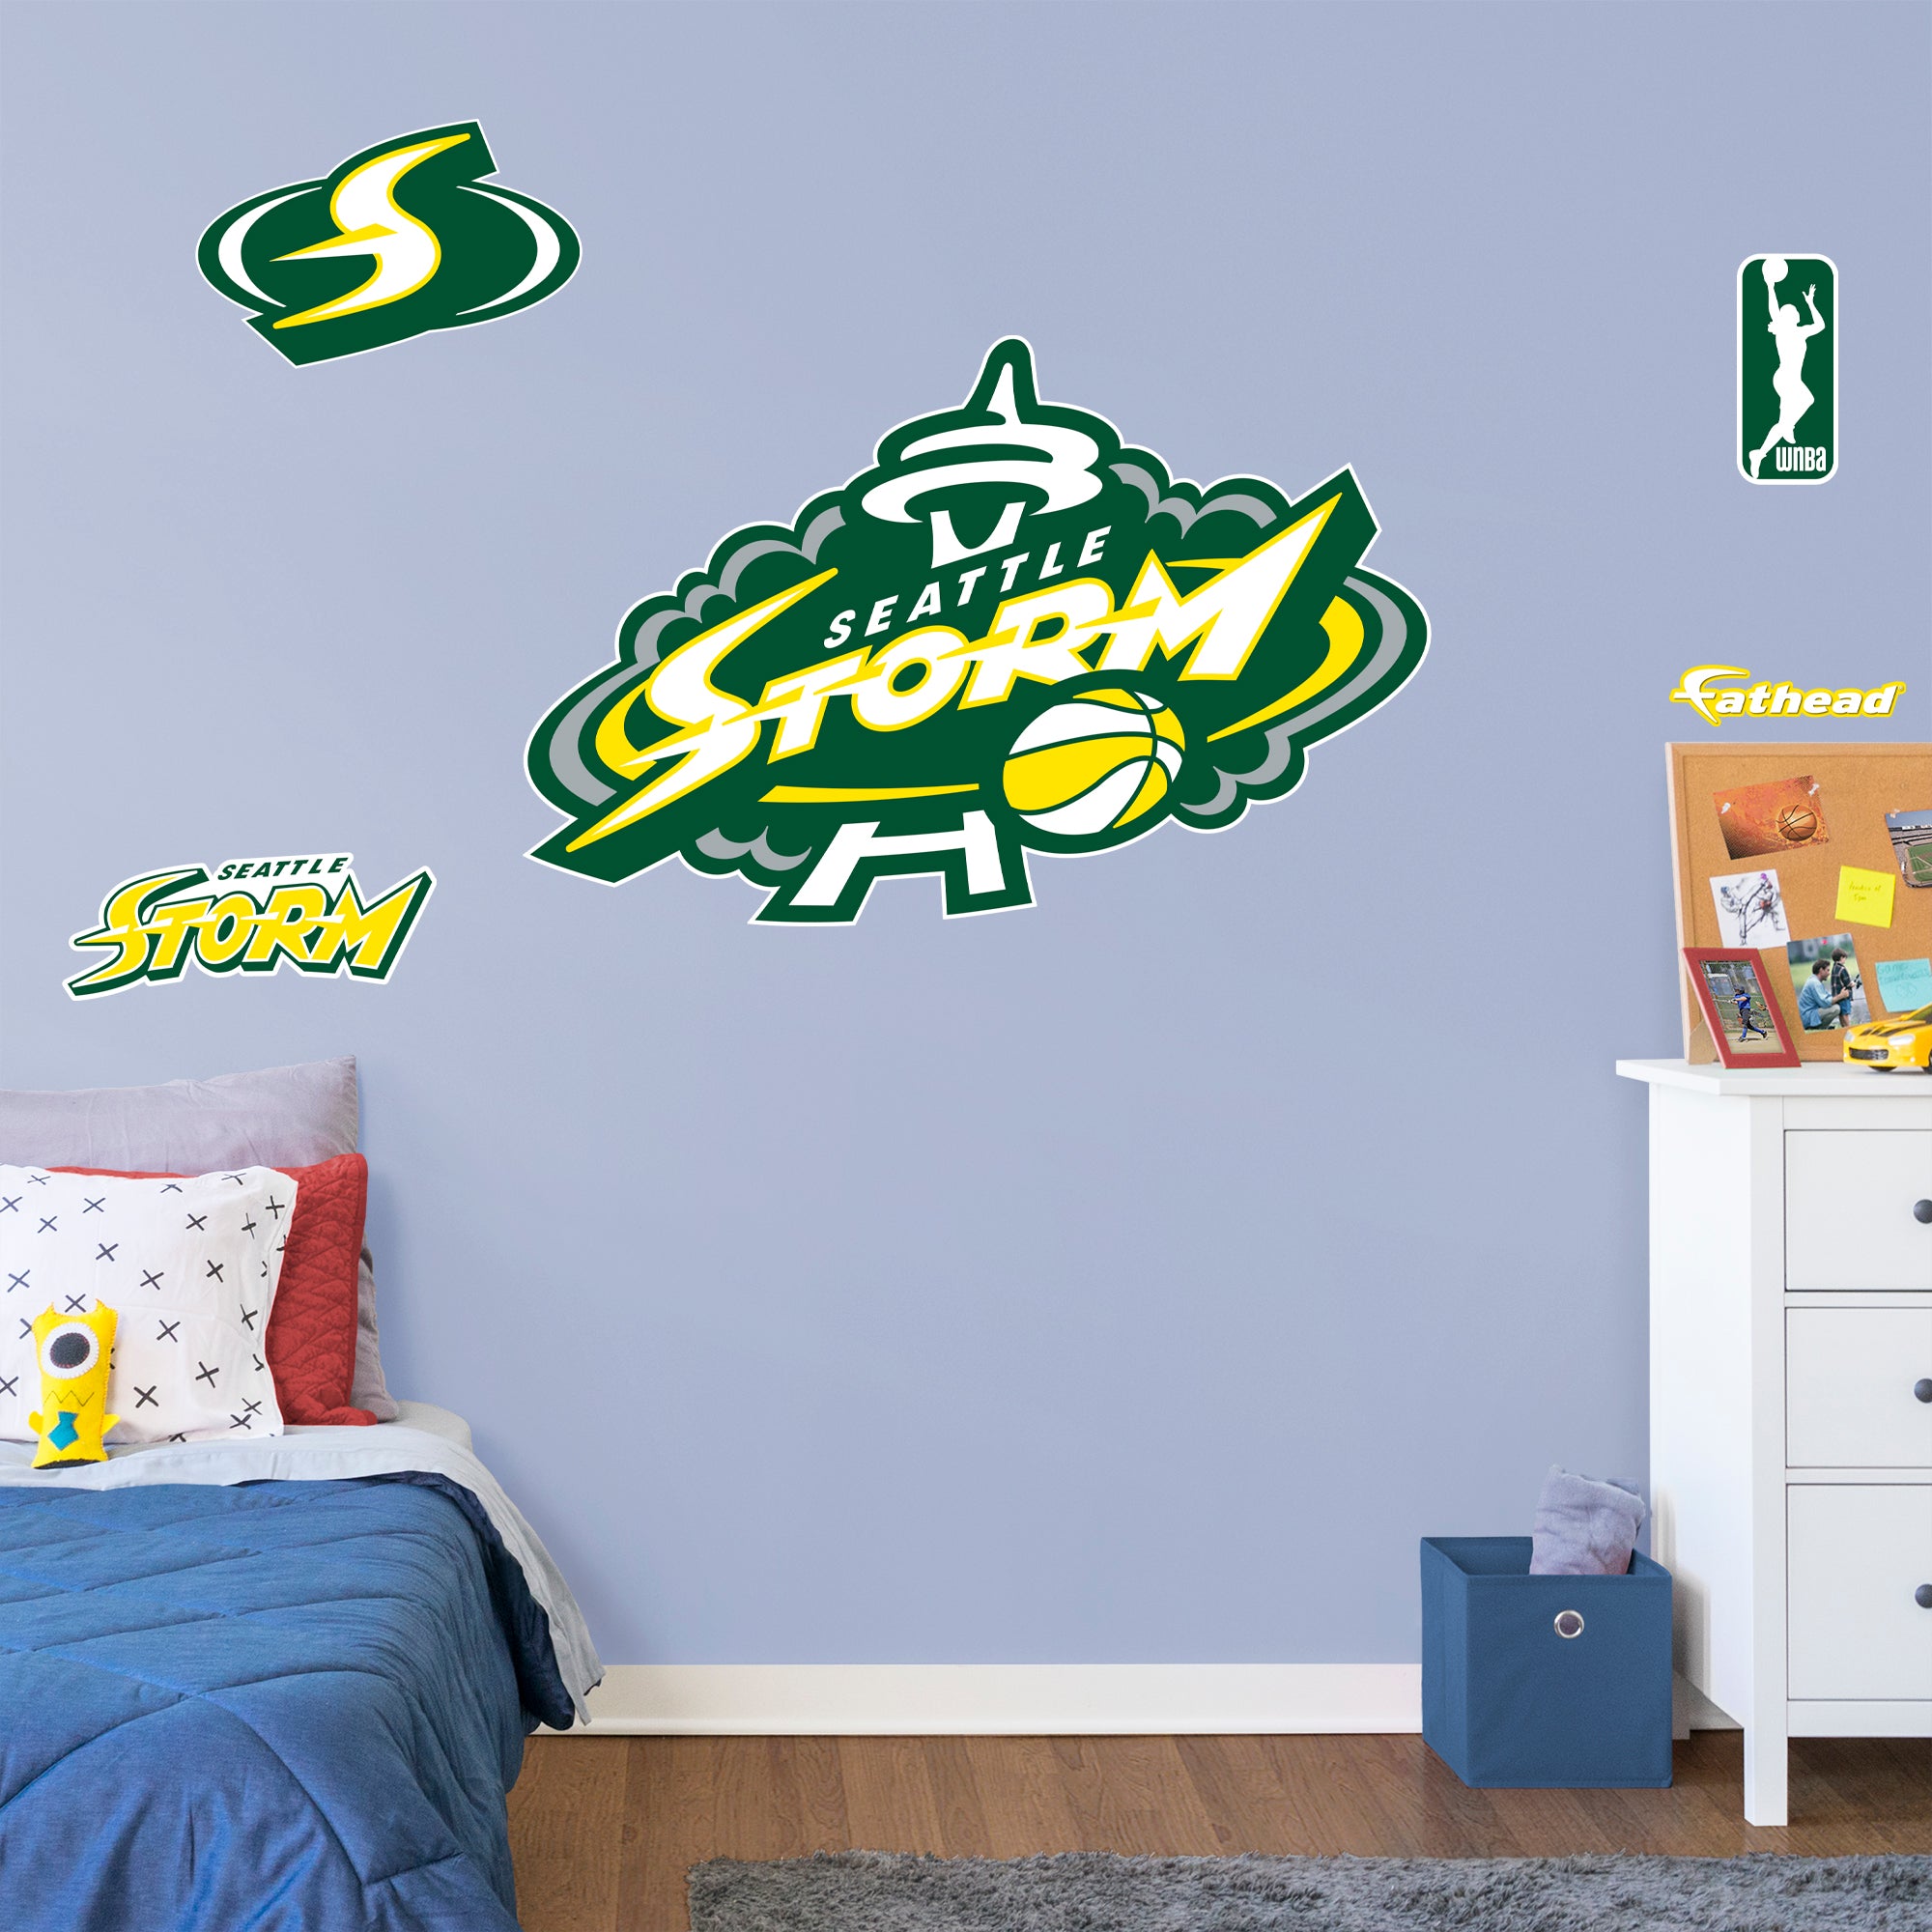 Seattle Storm: Logo - Officially Licensed WNBA Removable Wall Decal Giant + 4 Decals by Fathead | Vinyl